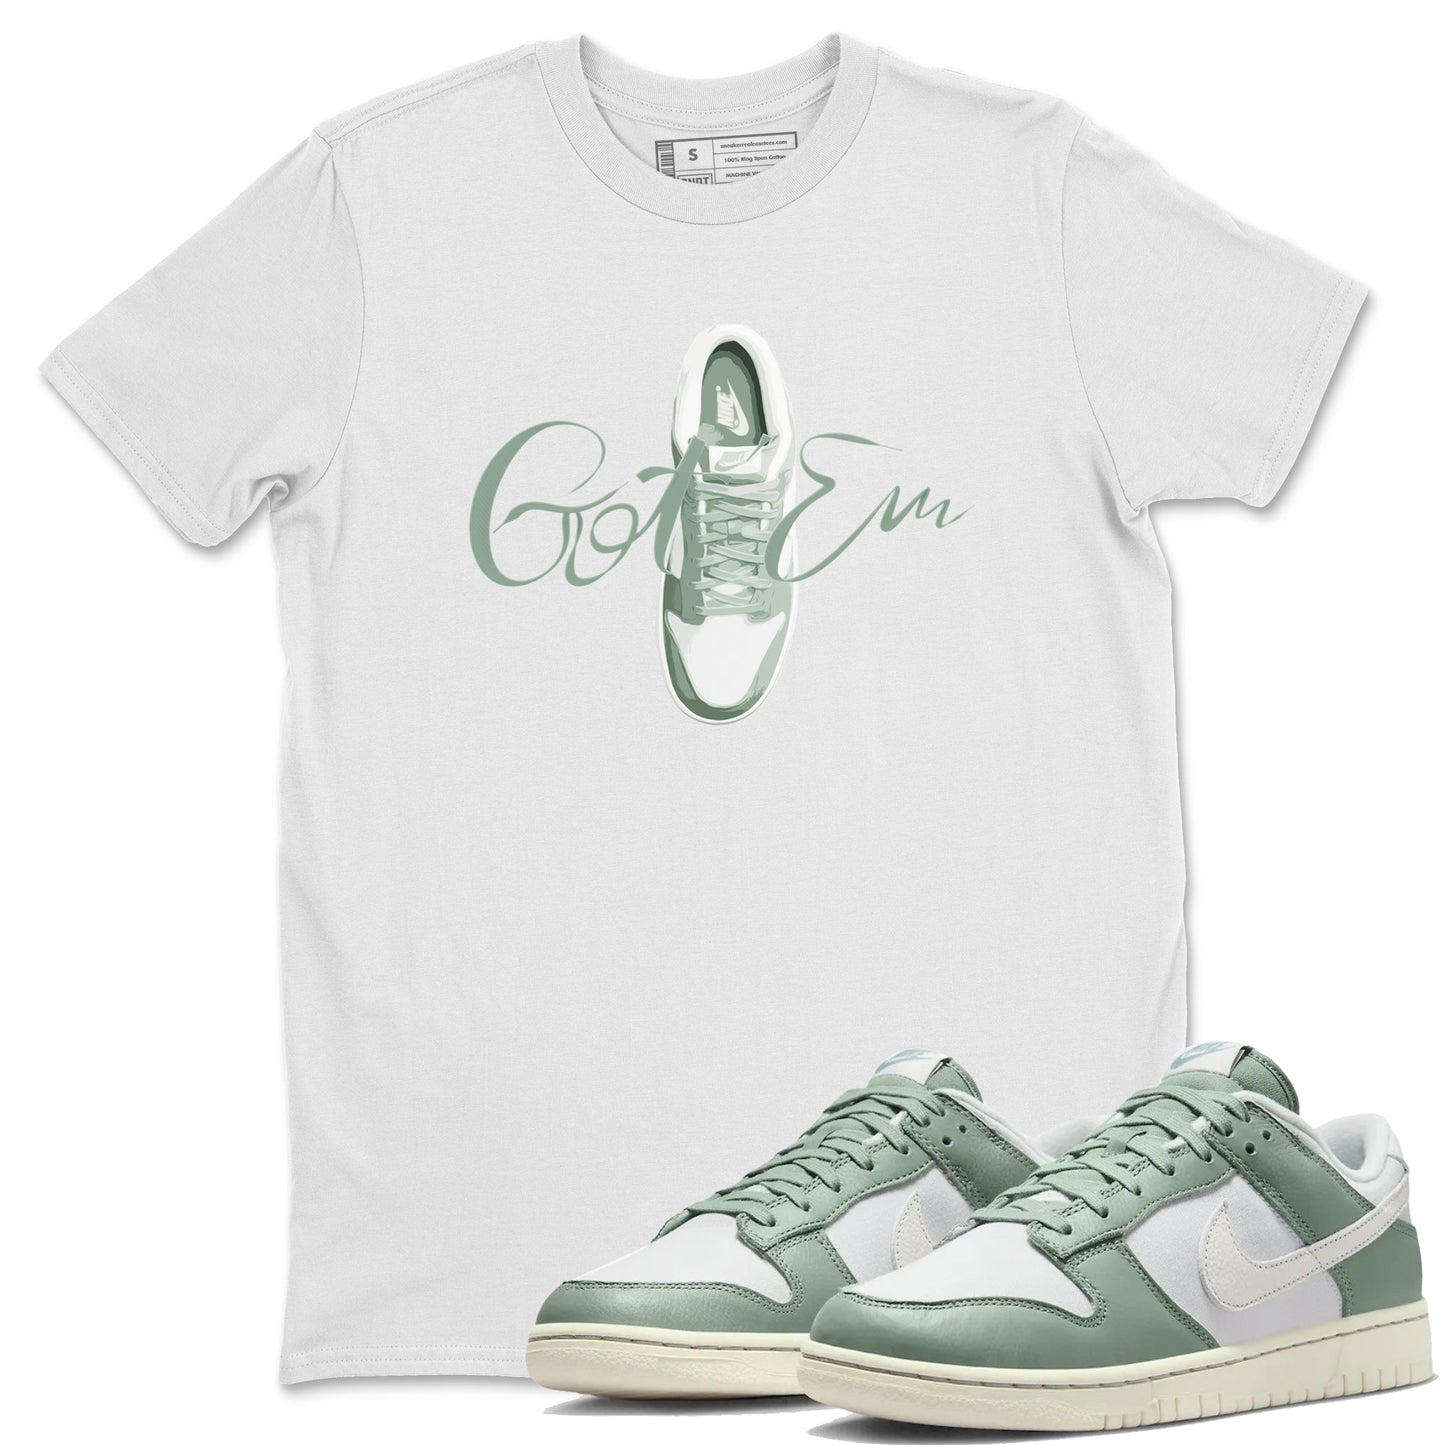 Dunk Mica Green Sneaker Match Tees Caligraphy Shoe Lace Sneaker Tees Dunk Low Mica Green Sneaker Release Tees Unisex Shirts White 1